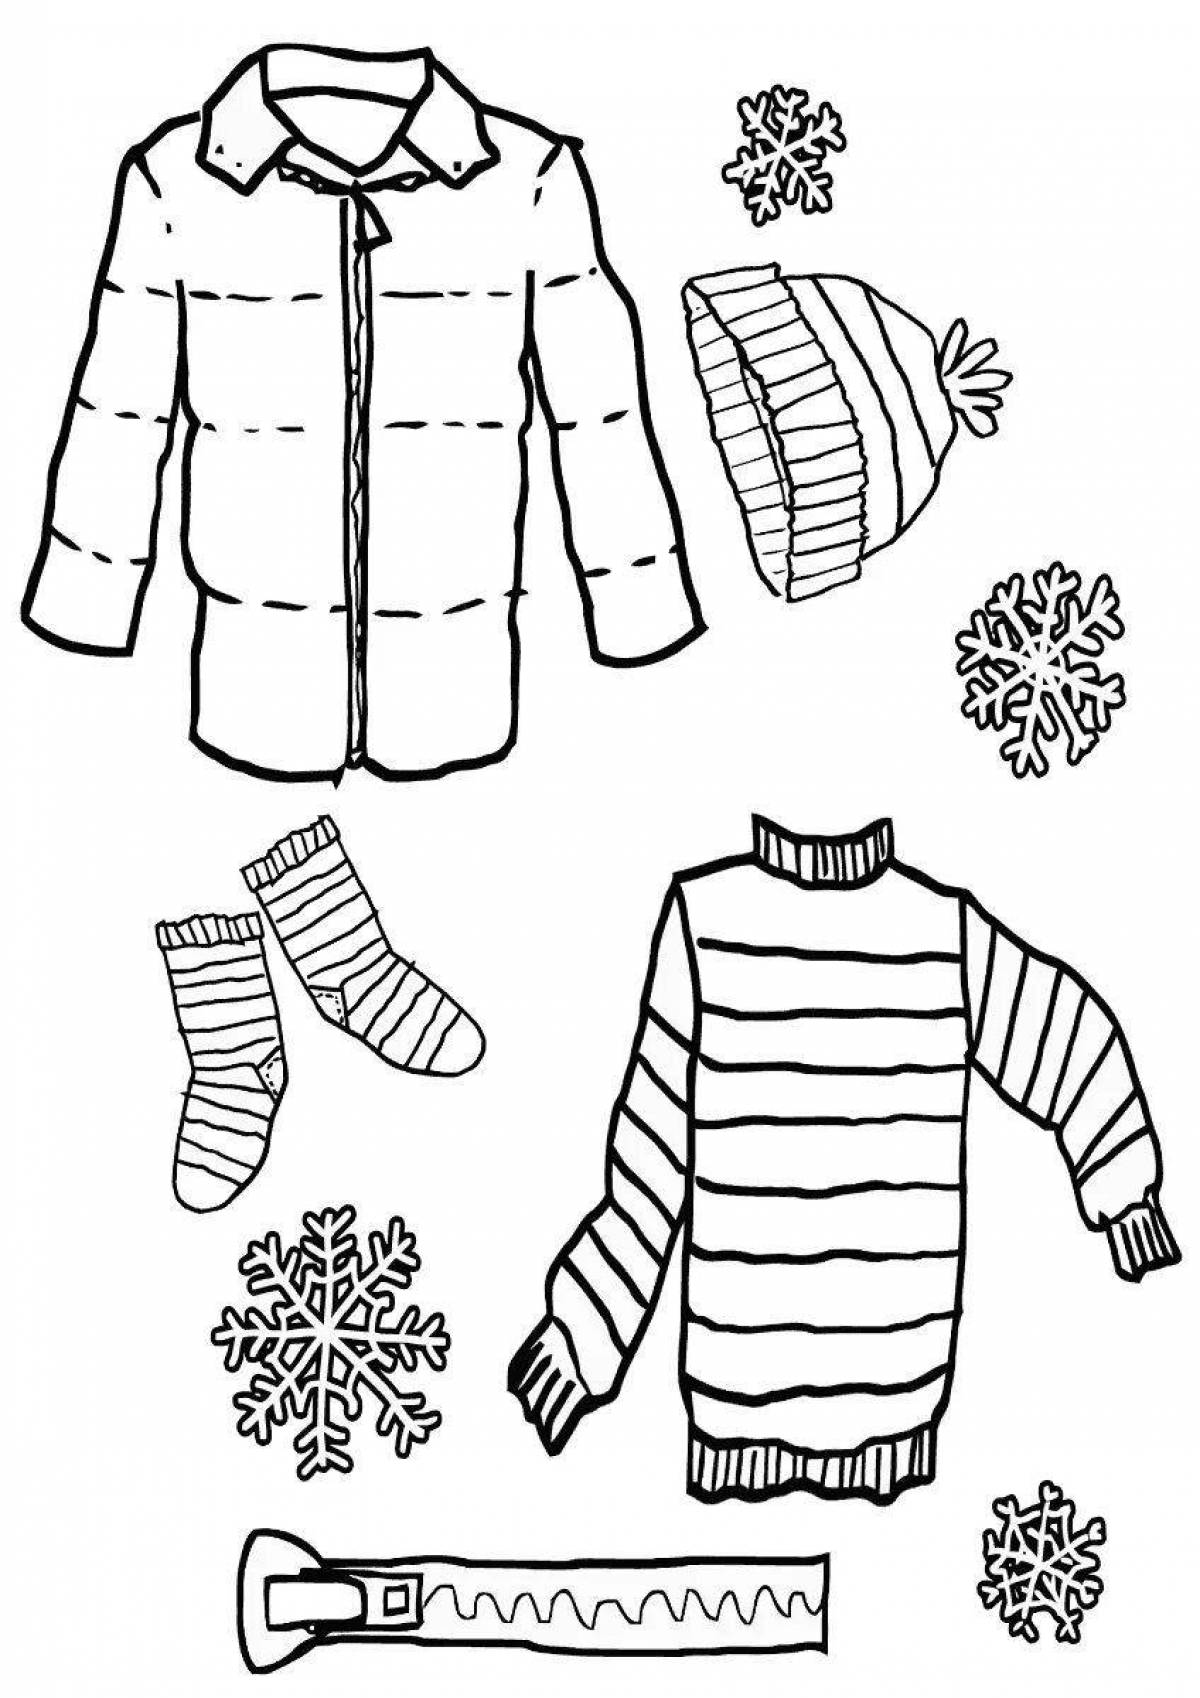 Adorable winter clothes coloring book for 3-4 year olds